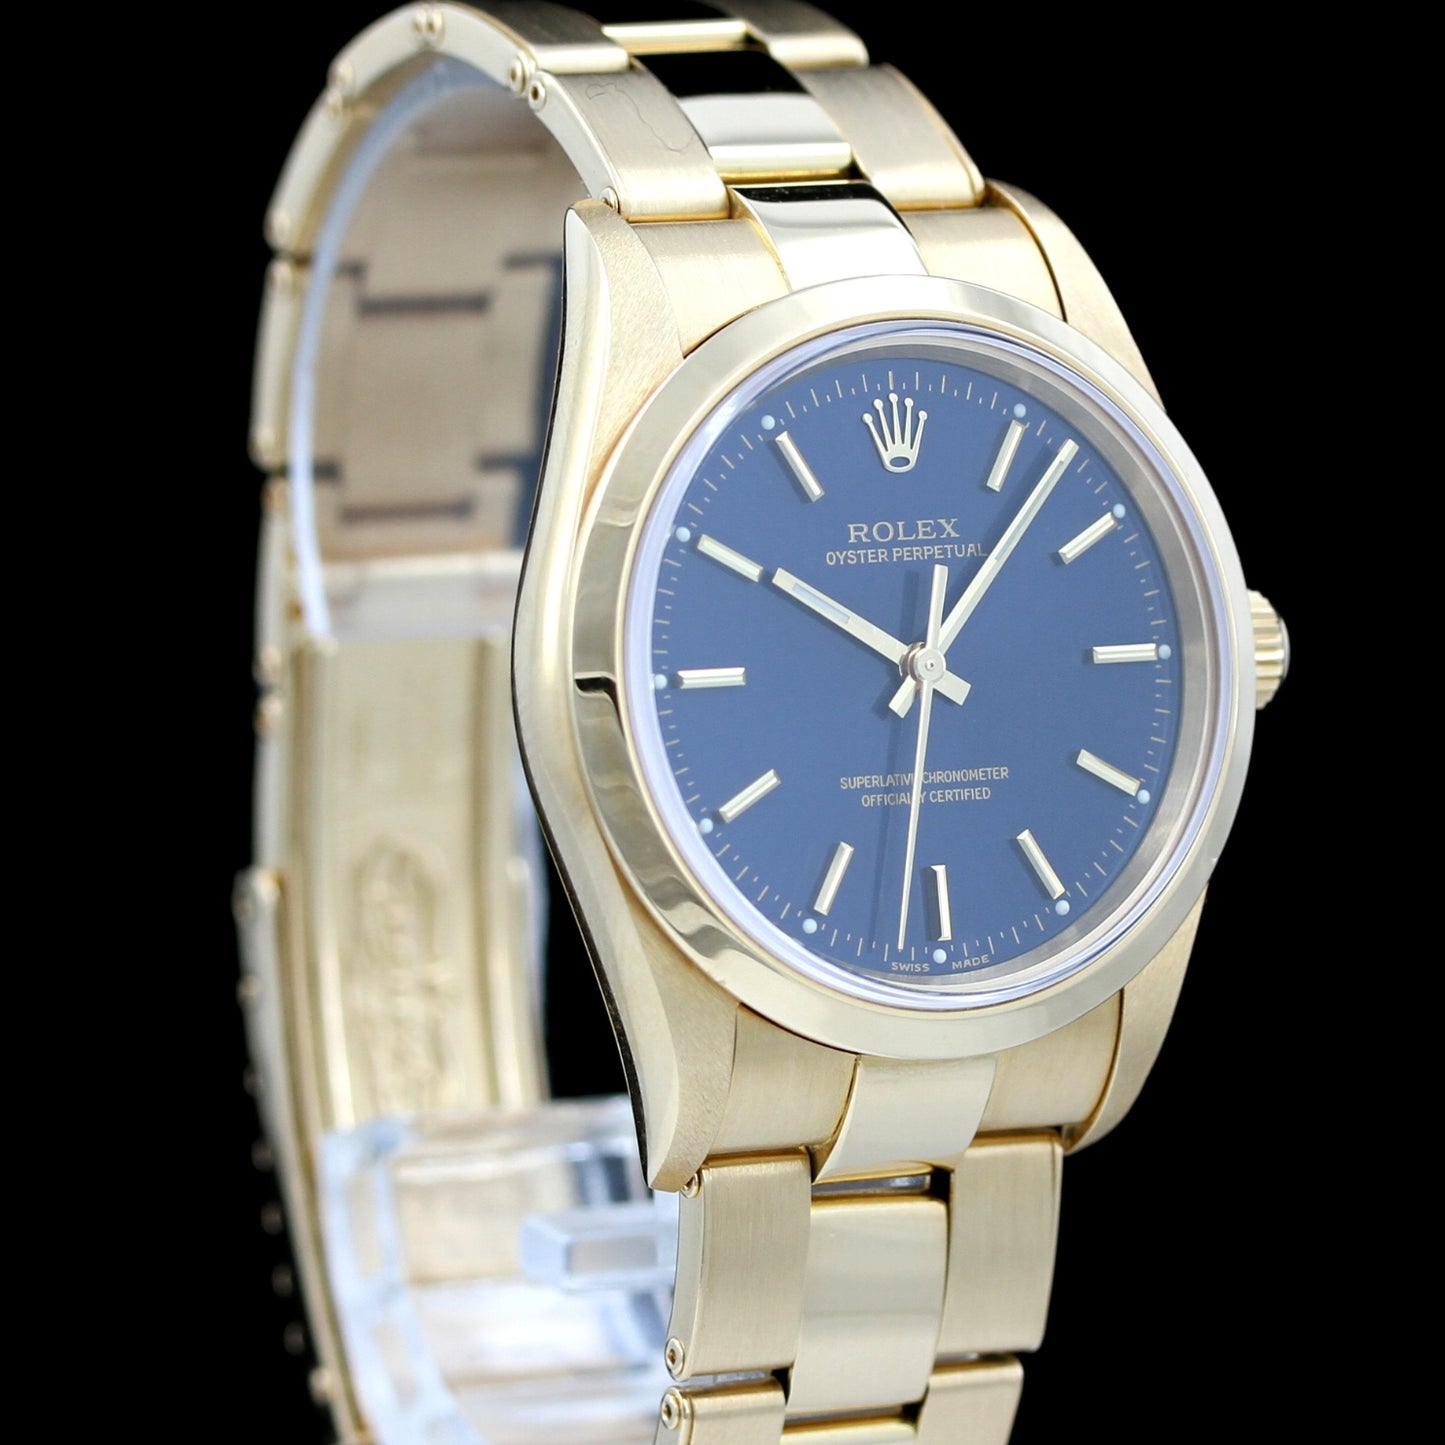 Rolex Oyster Perpetual 34 Blue, Gelbgold, 14208M, 2004, B+P